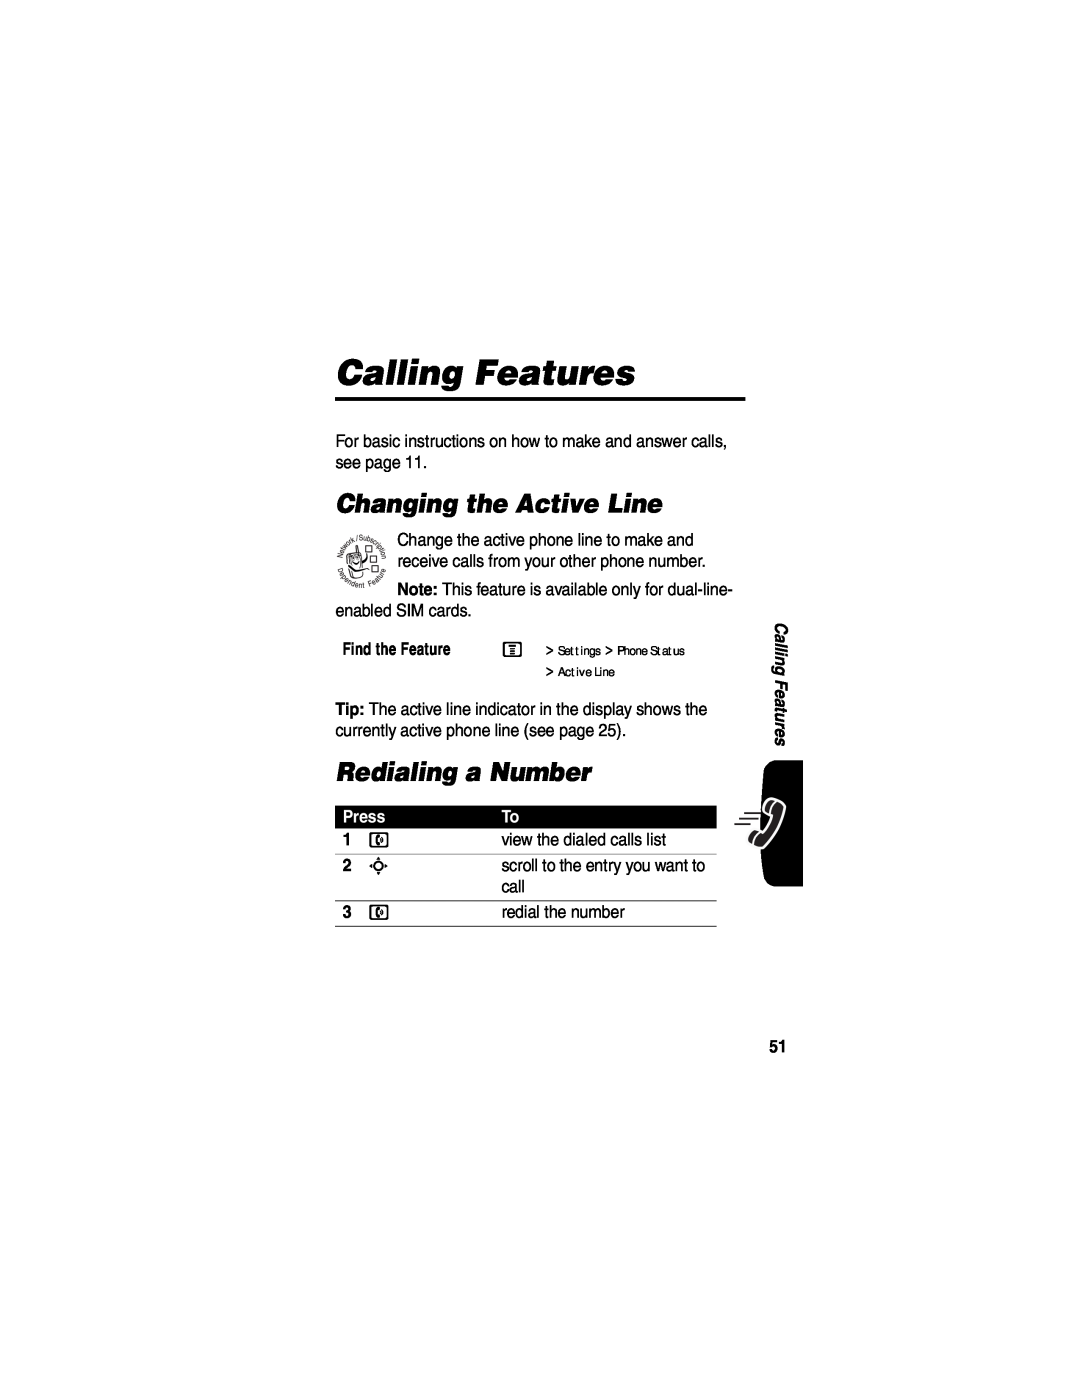 Motorola V555 manual Calling Features, Changing the Active Line, Redialing a Number, Press 